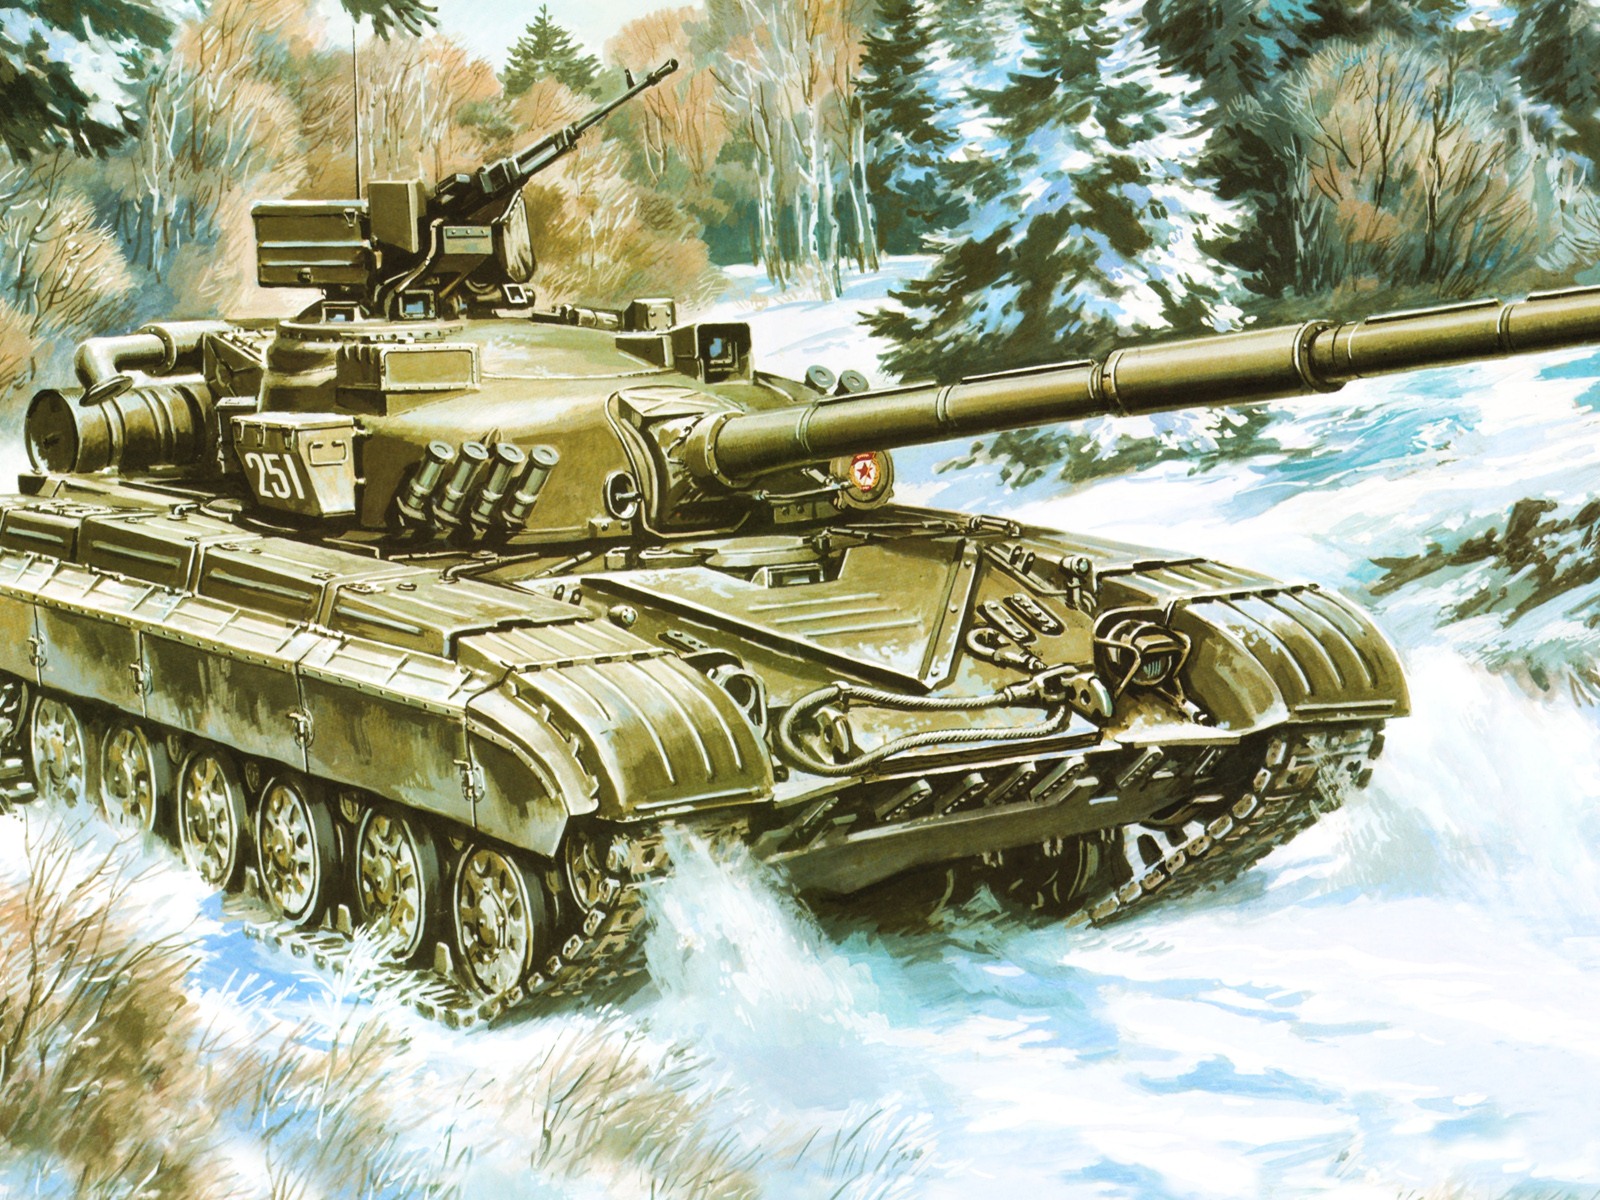 Military tanks, armored HD painting wallpapers #1 - 1600x1200